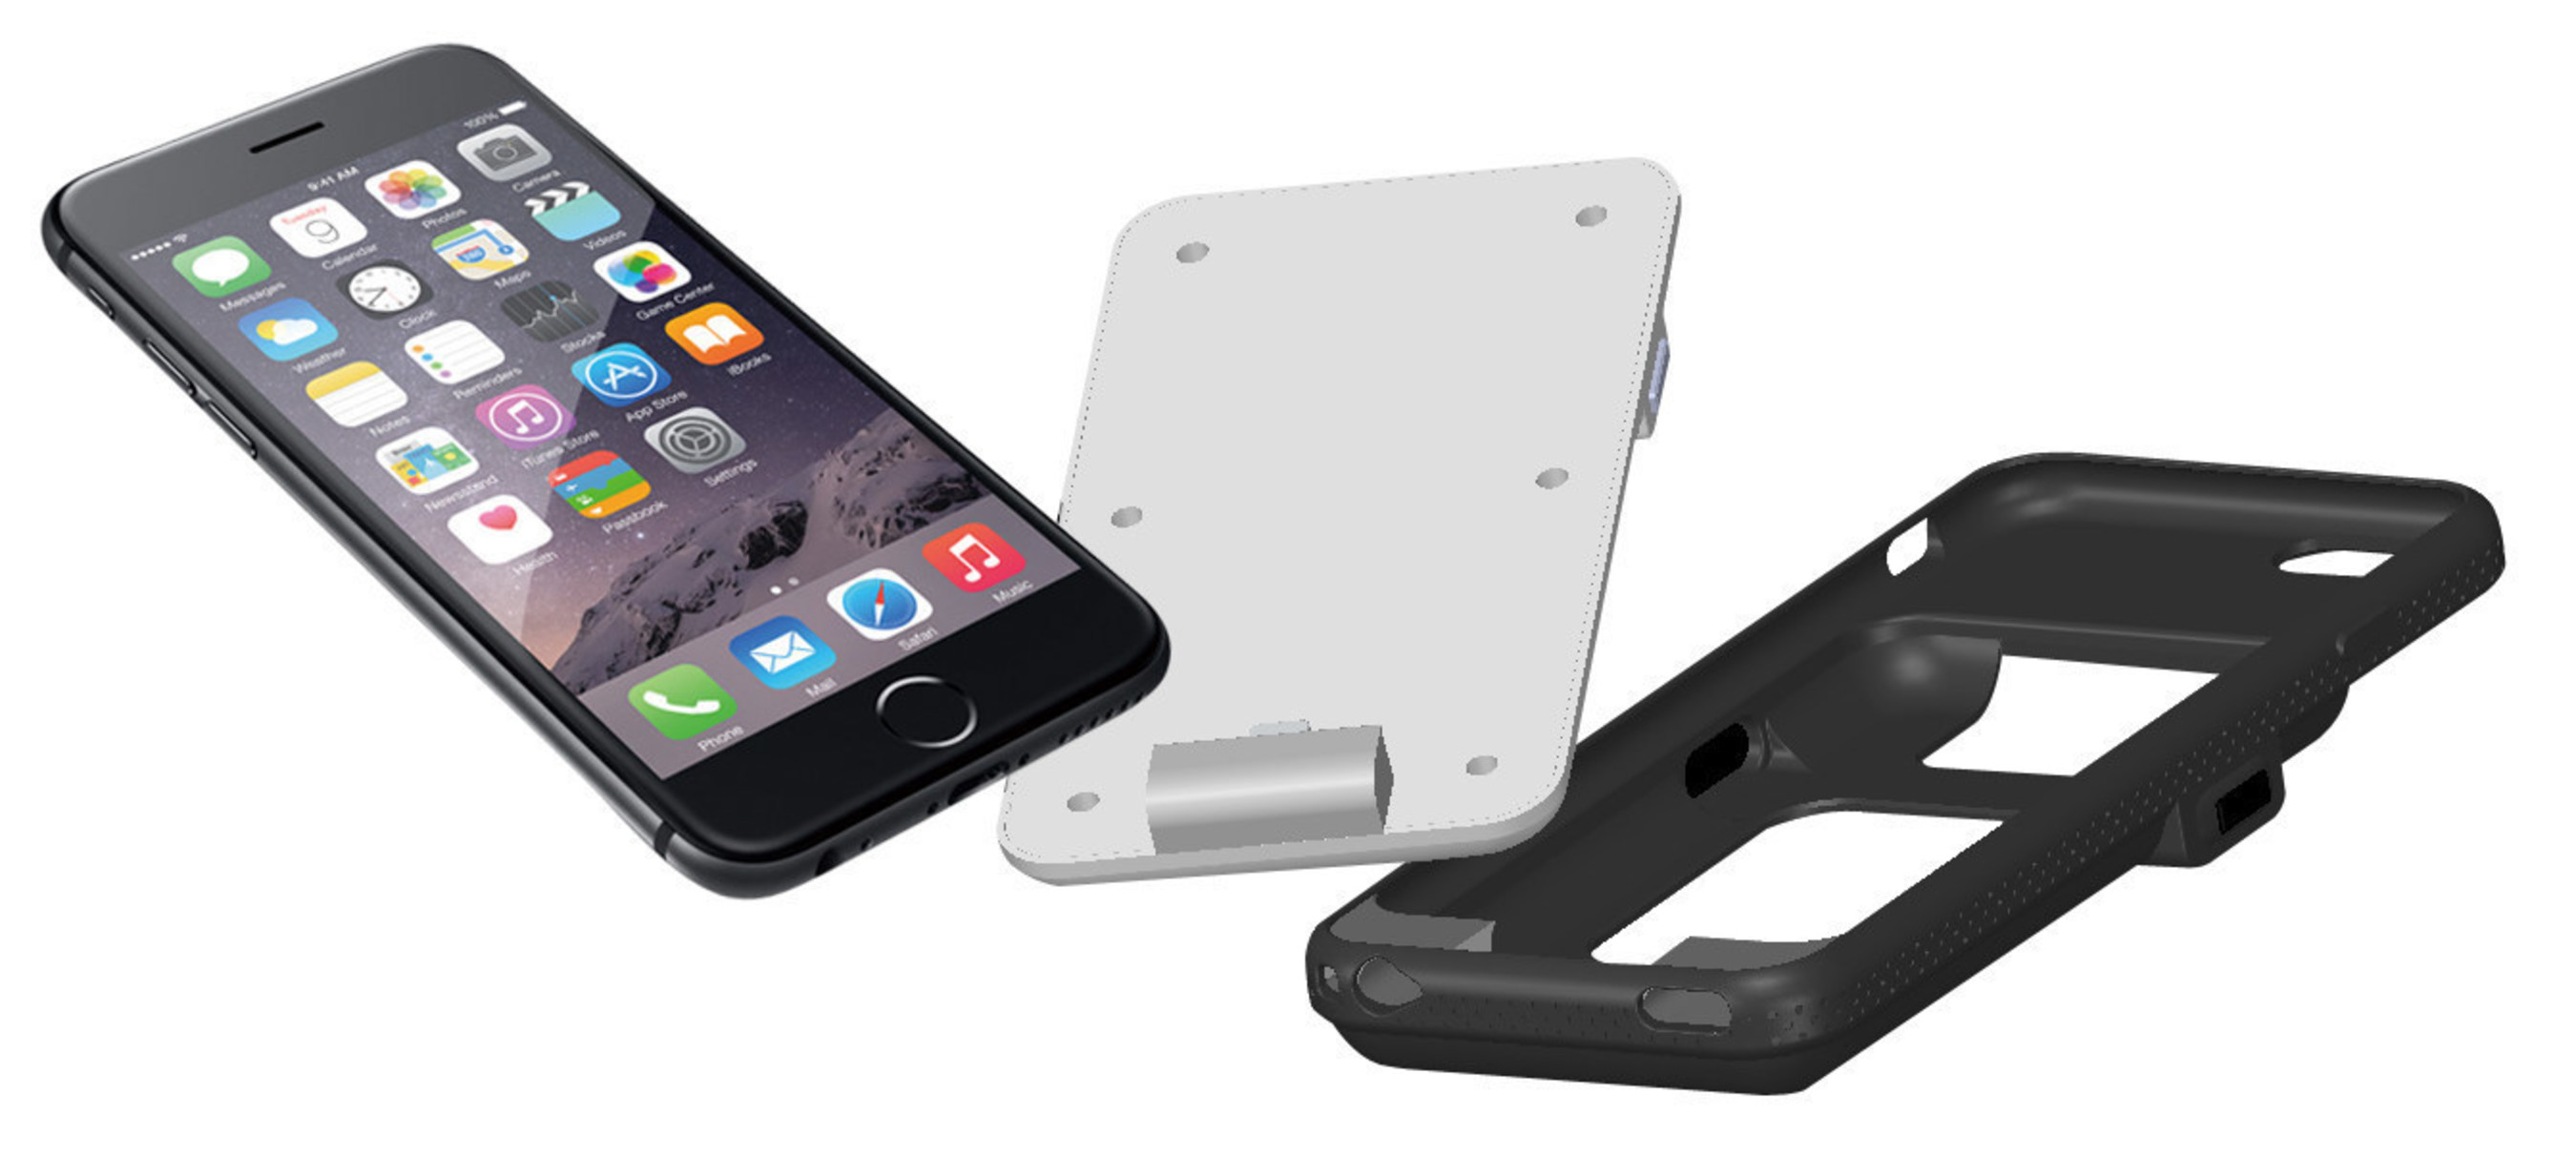 NEW AsReader BARCODE SCANNERS & RFID READERS/WRITERS utilize separation of the reader-module-dock and case for use with the iPhone 6 & 6 Plus. This adds to AsReader's lineup of 1D/2D Barcode Scanner and RFID Reader/Writer docks for iPhone 5, 5S, and iPod touch 5th Generation, which began selling in Japan in June of 2014.